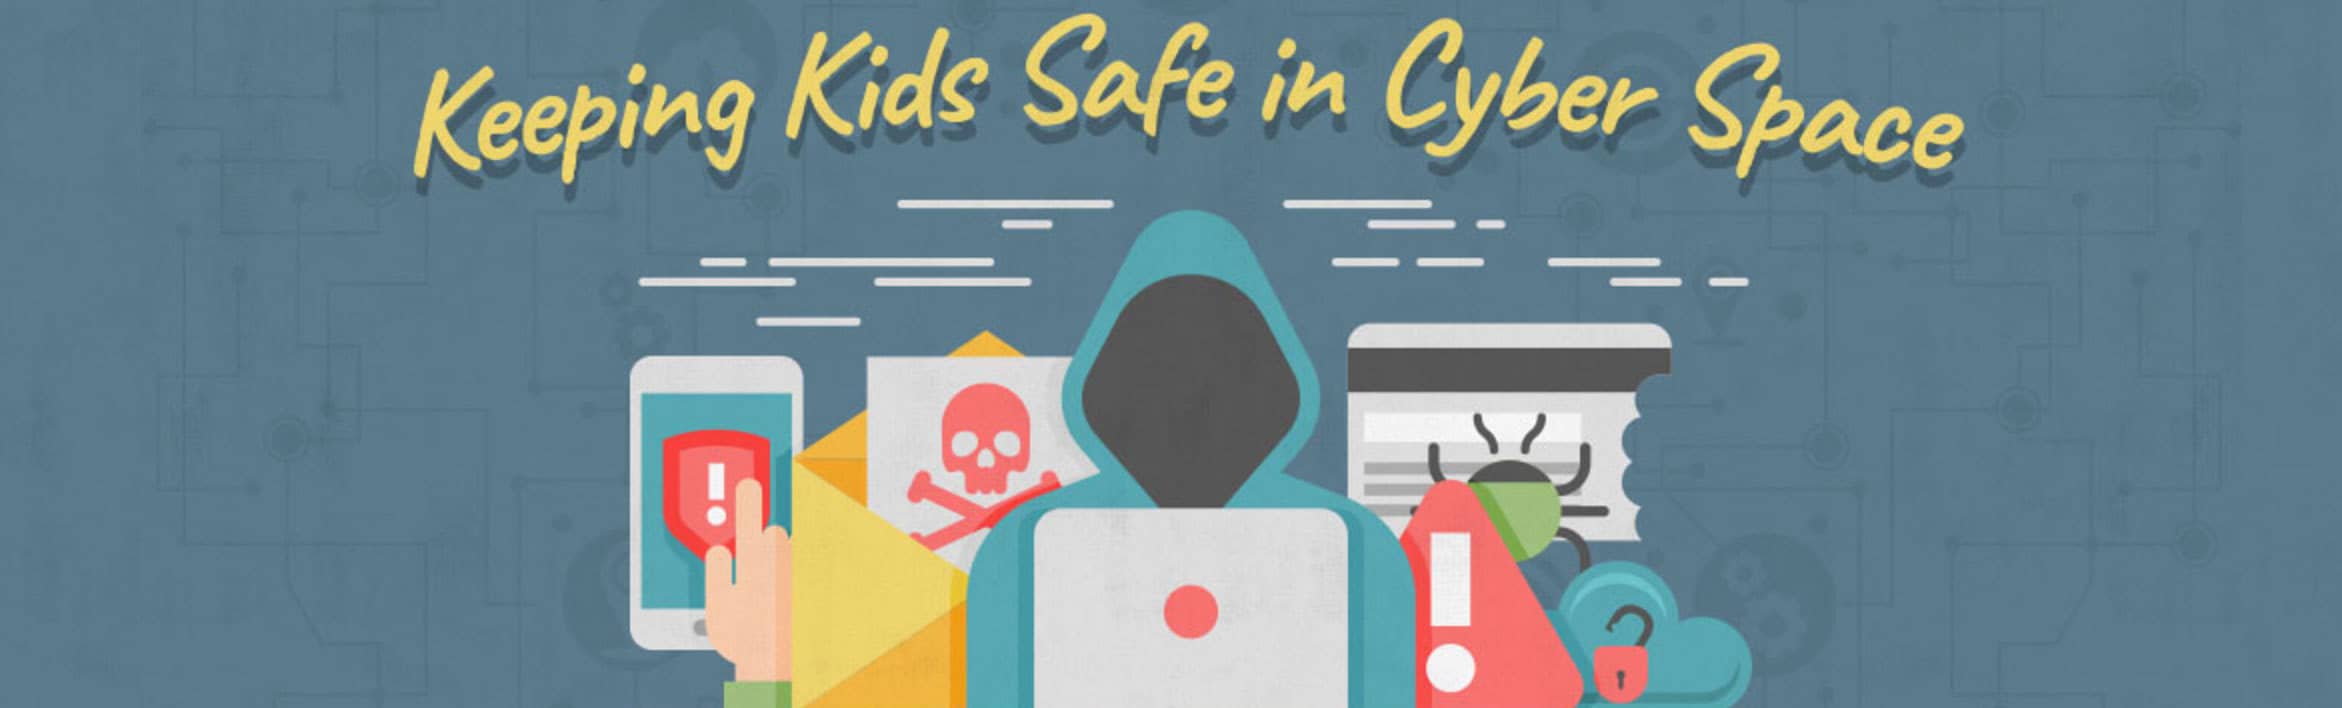 Kids Safety in the Digital Age Featured Image